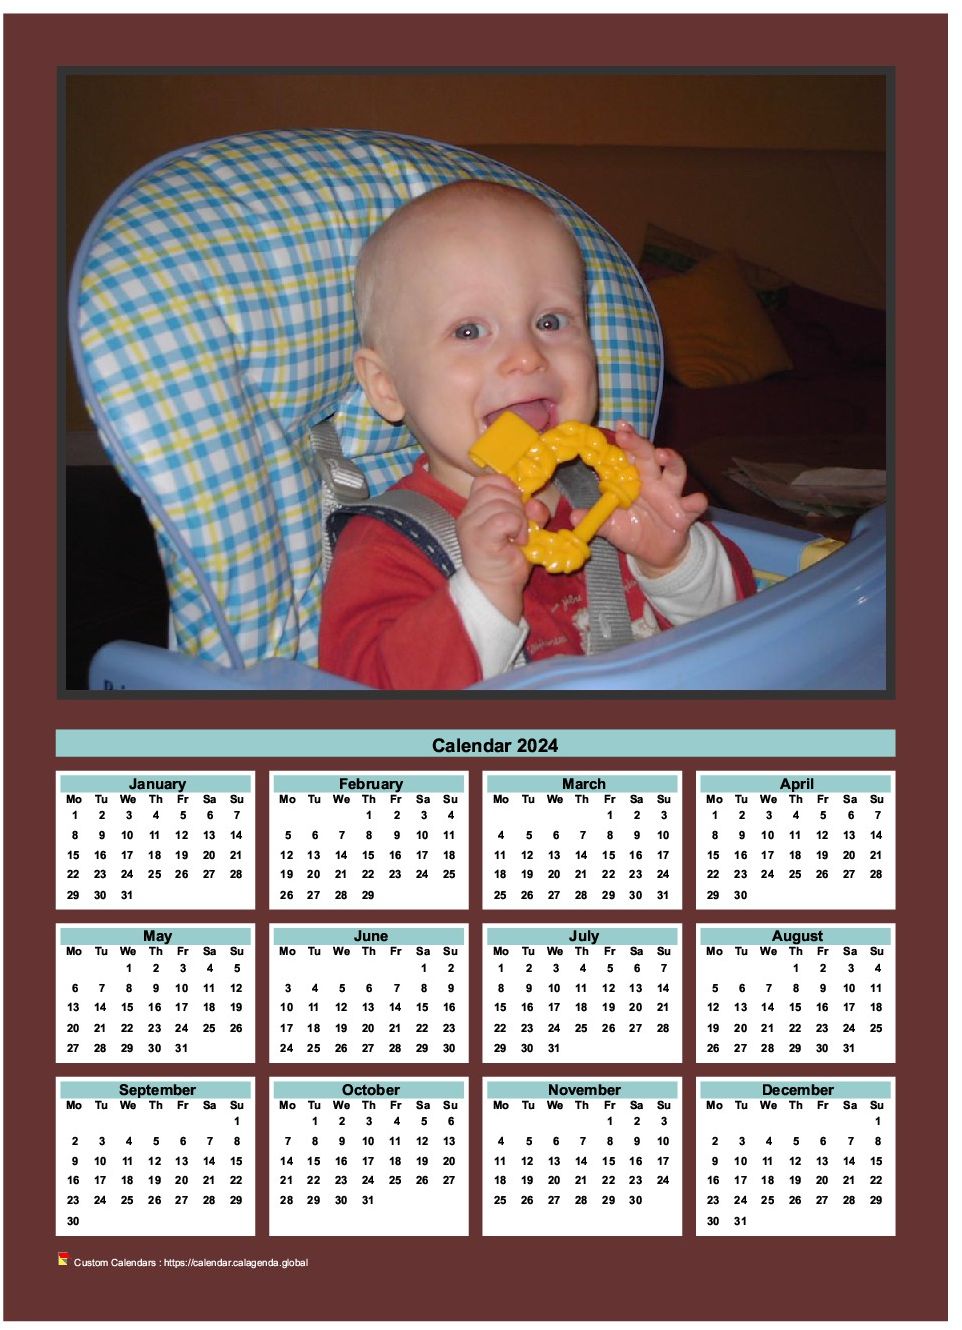 Calendar 2024 annual to print with family photo